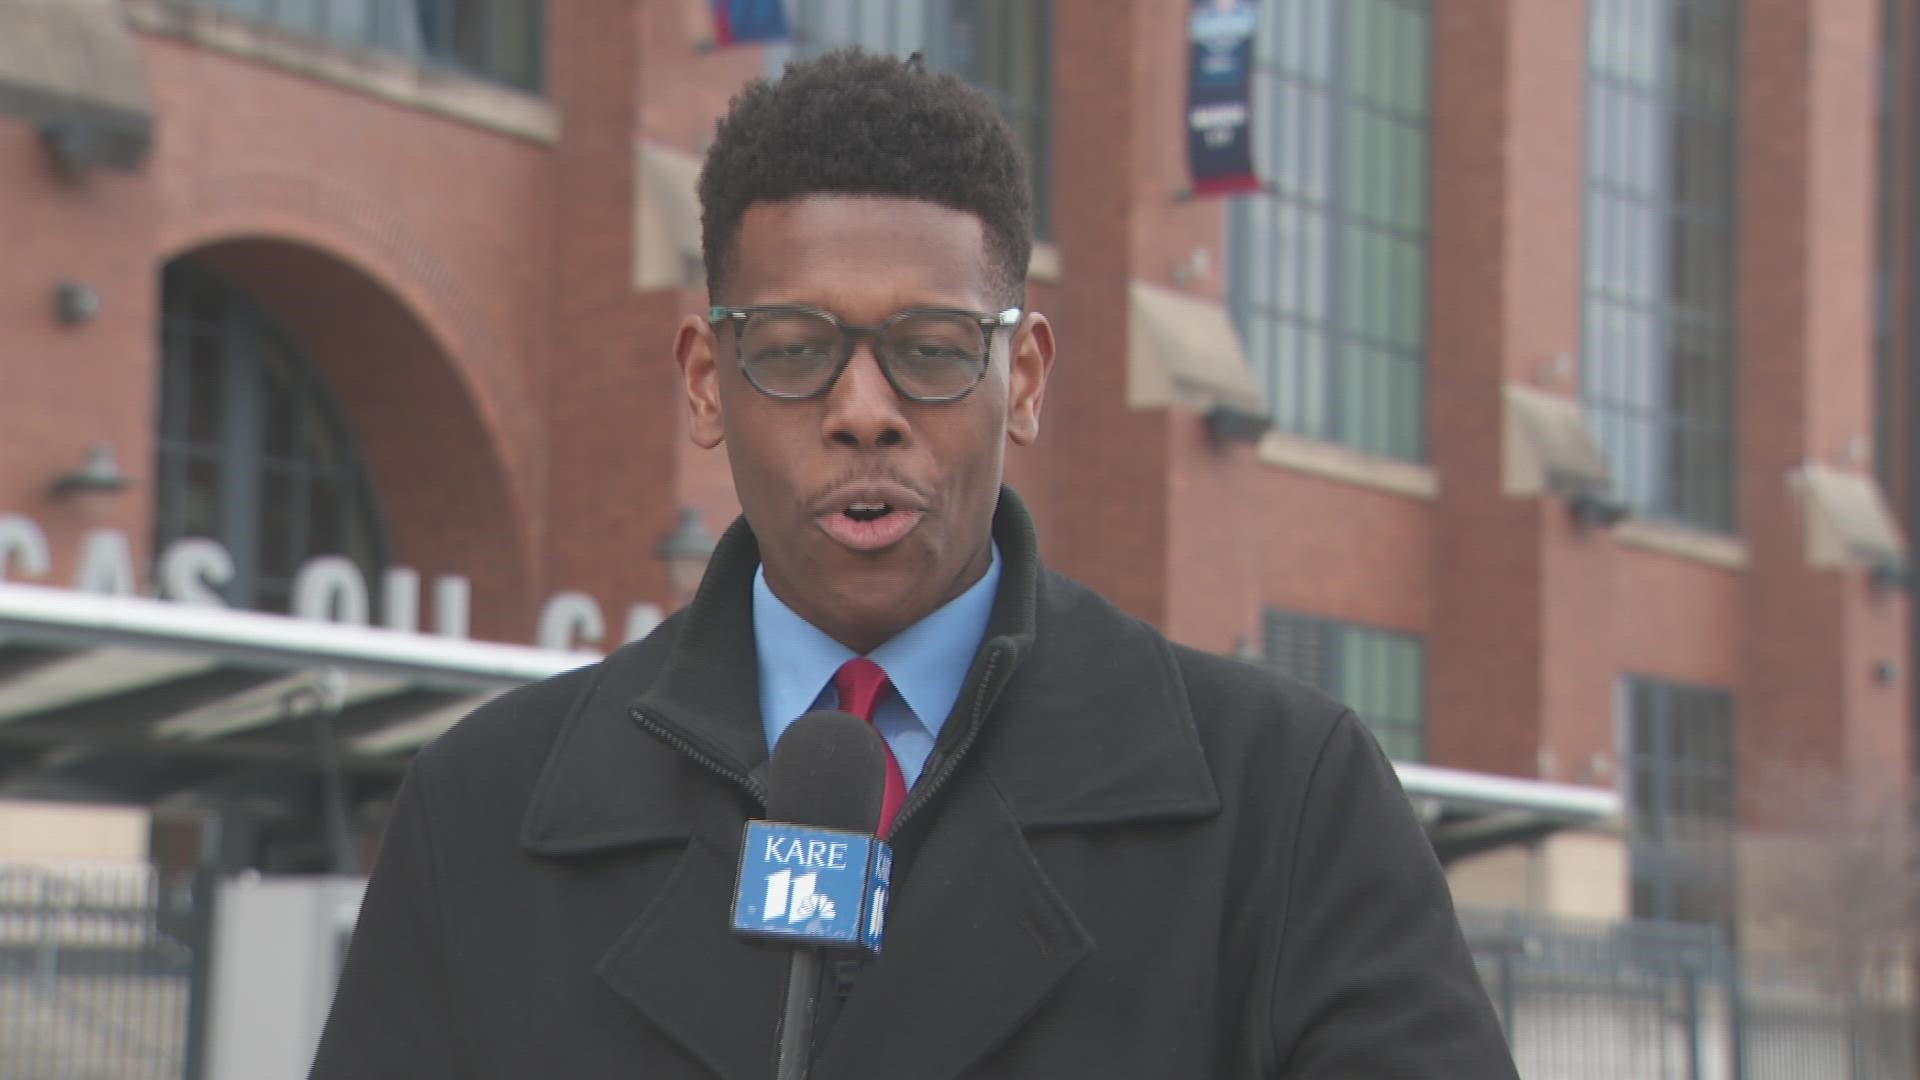 KARE 11 Sports Director Reggie Wilson reports from the NFL combine.